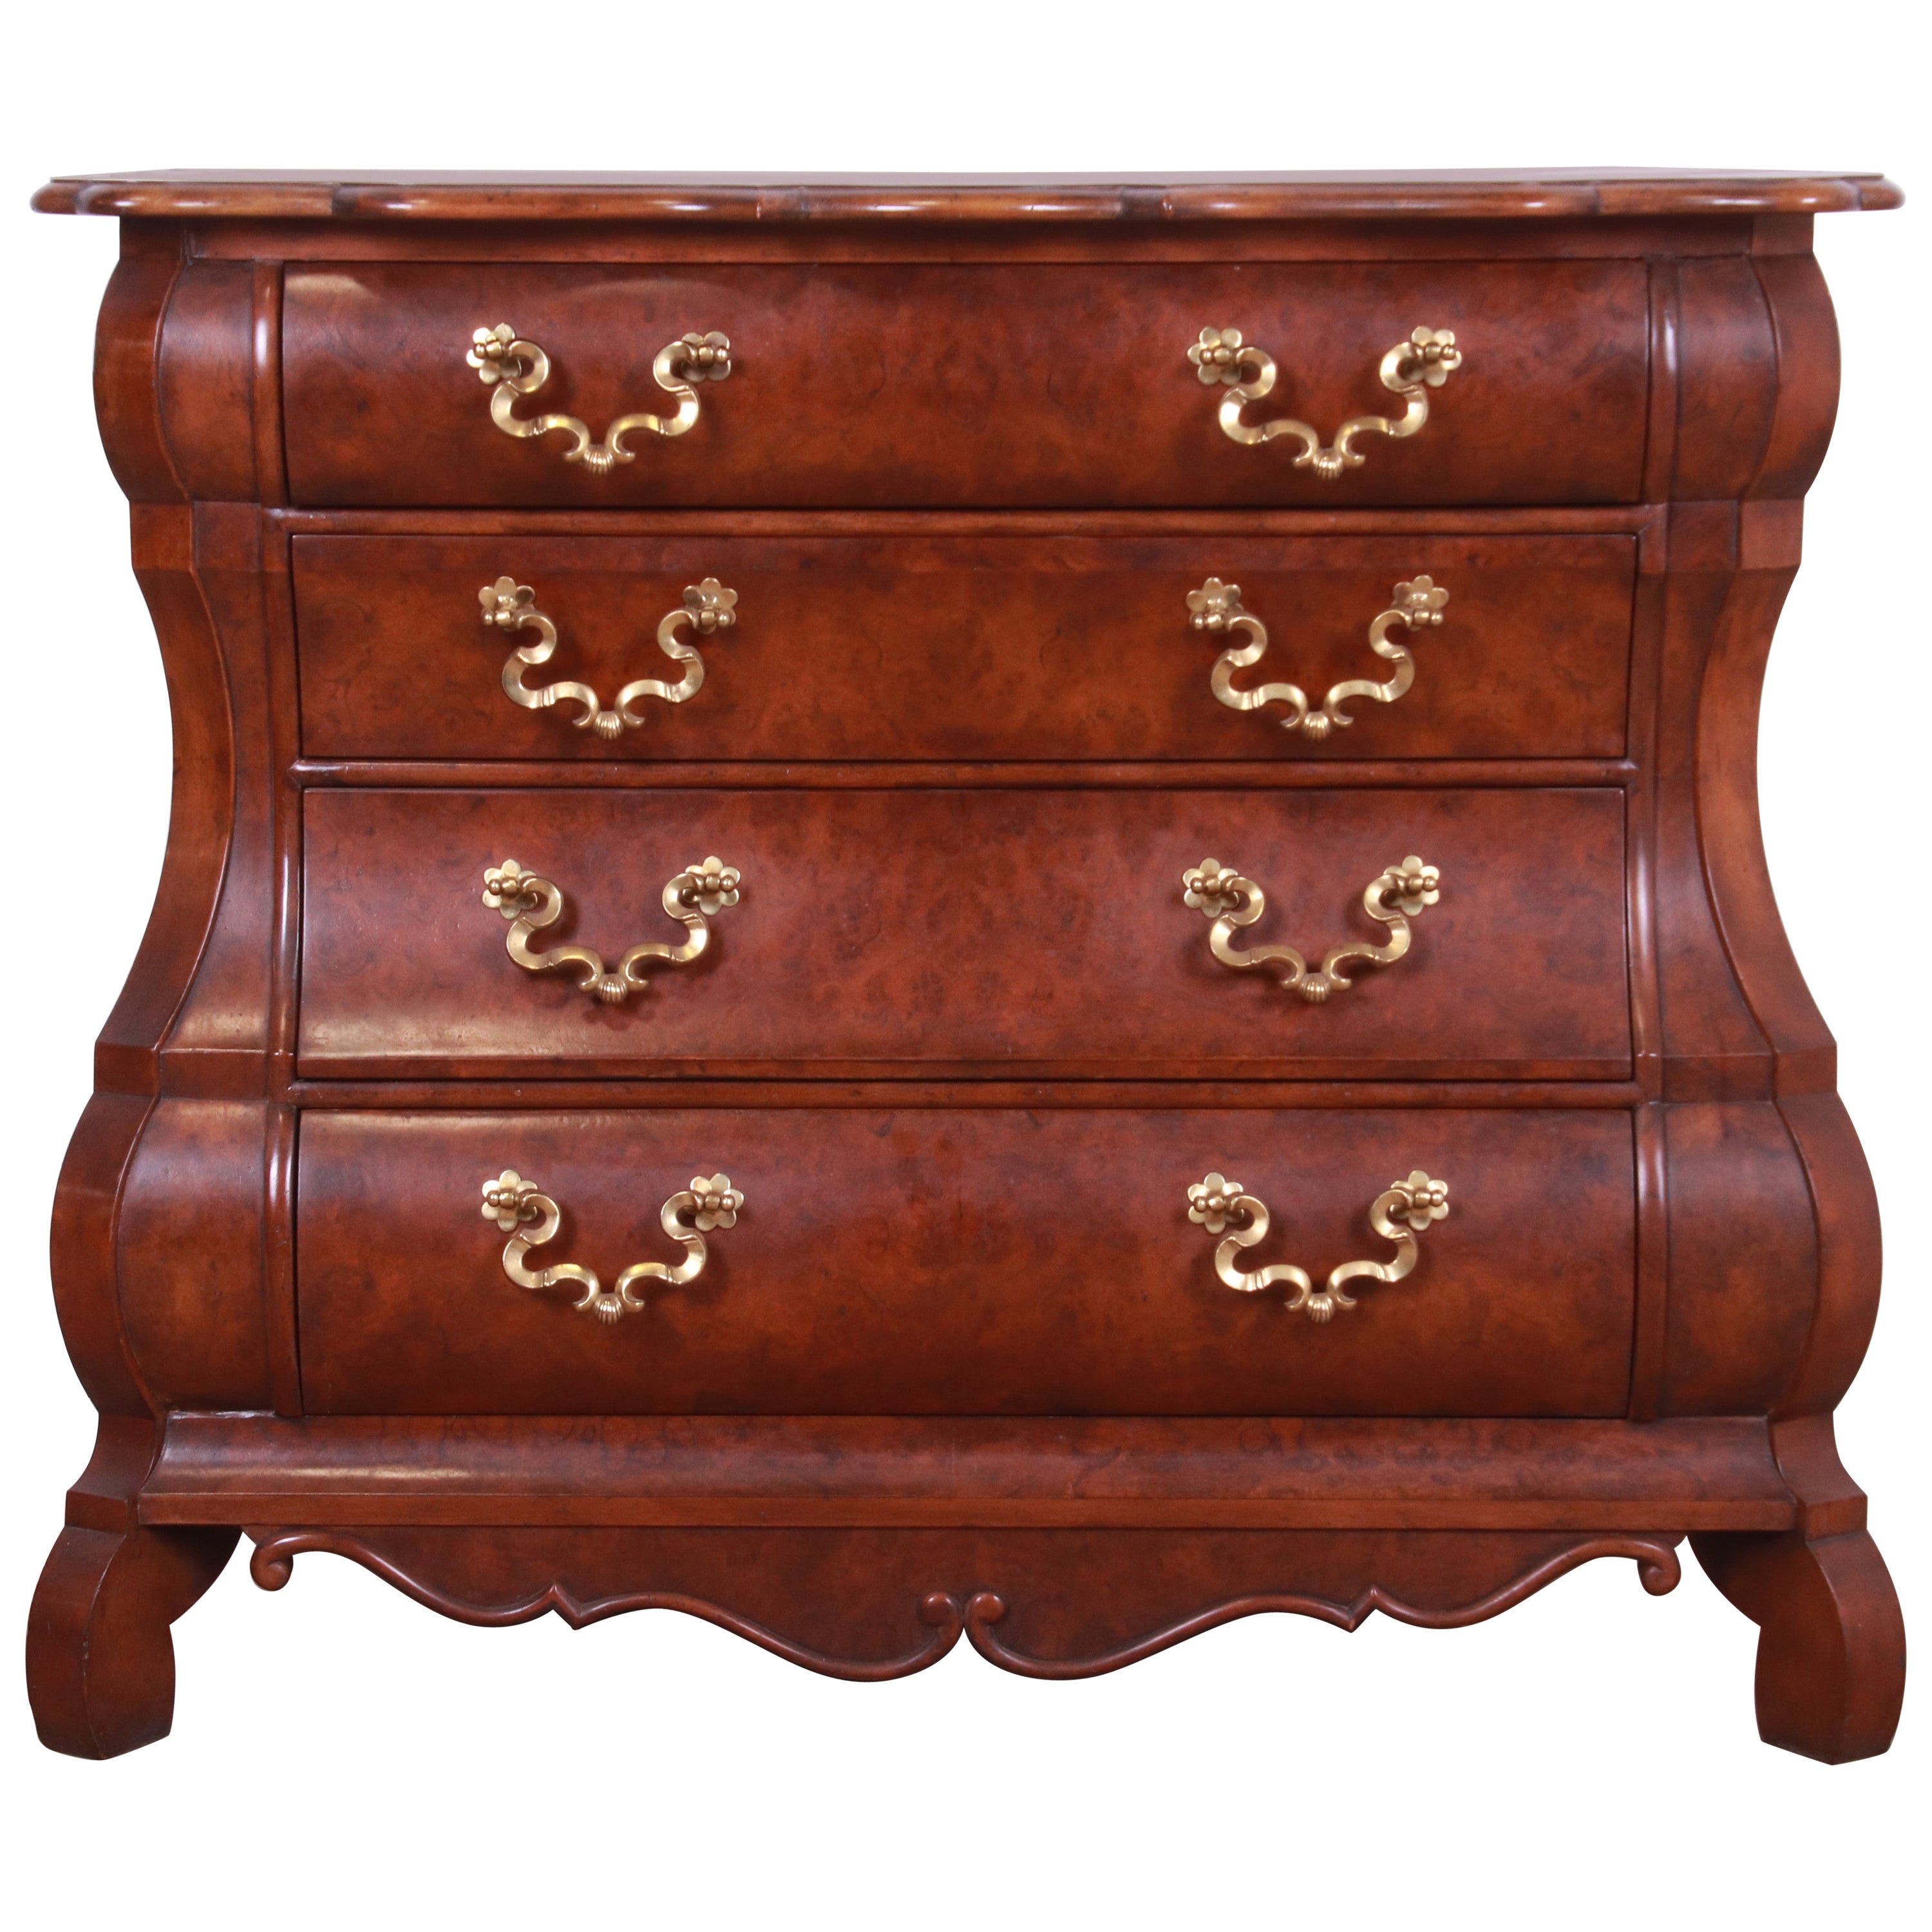 Baker Furniture Dutch Burled Walnut Bombe Chest or Commode